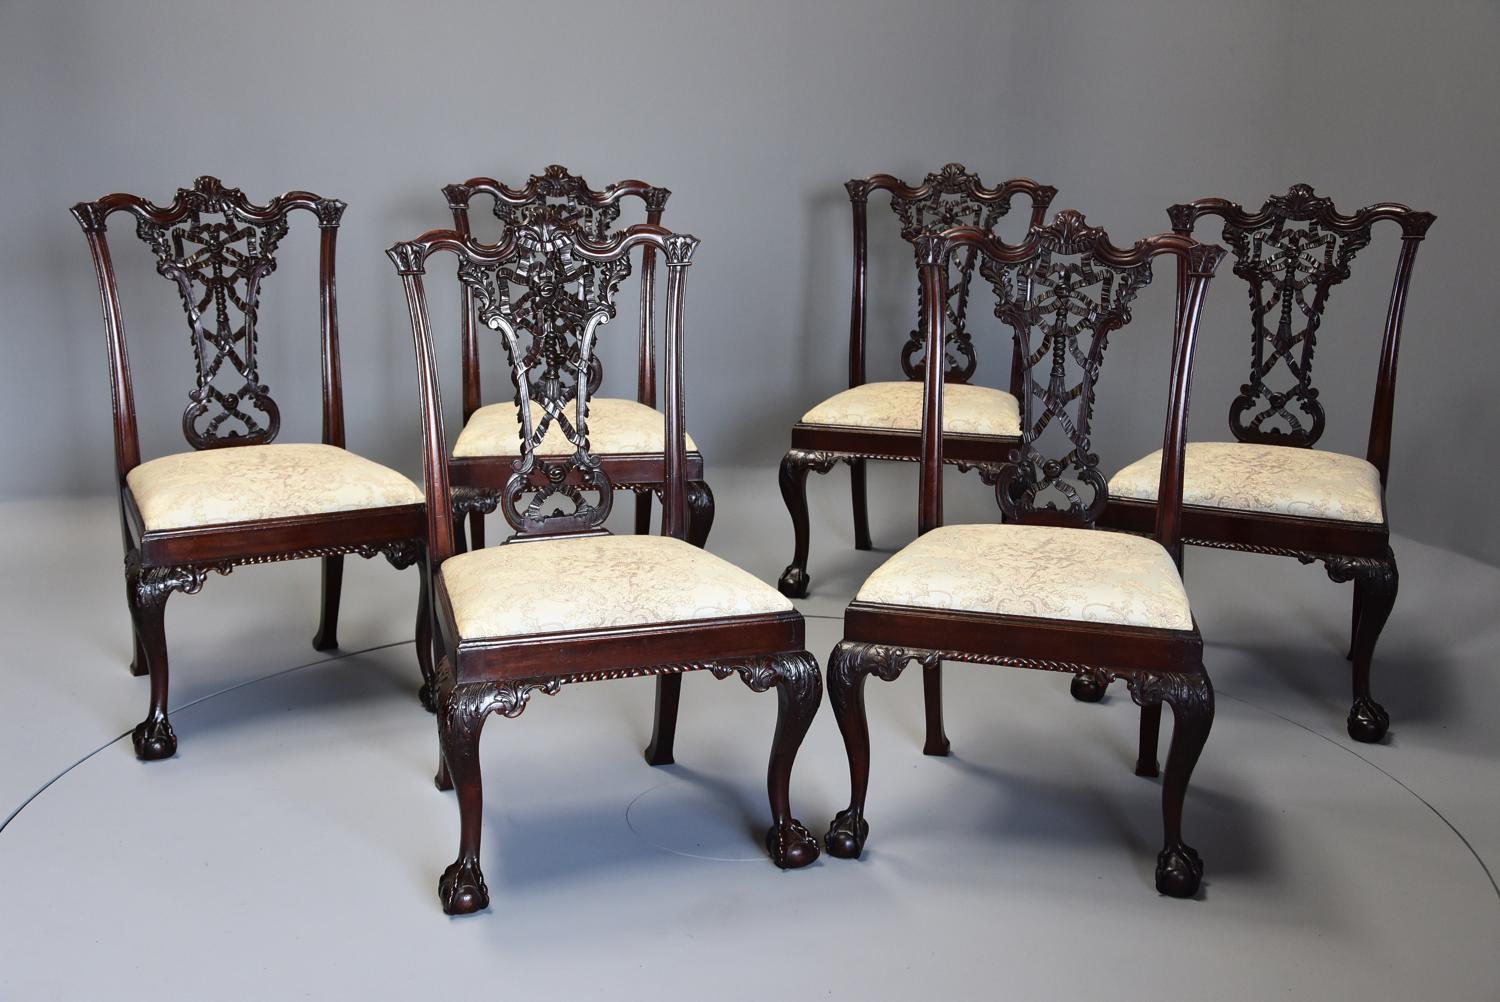 Set of six mahogany ribbon back chairs in the Chippendale style